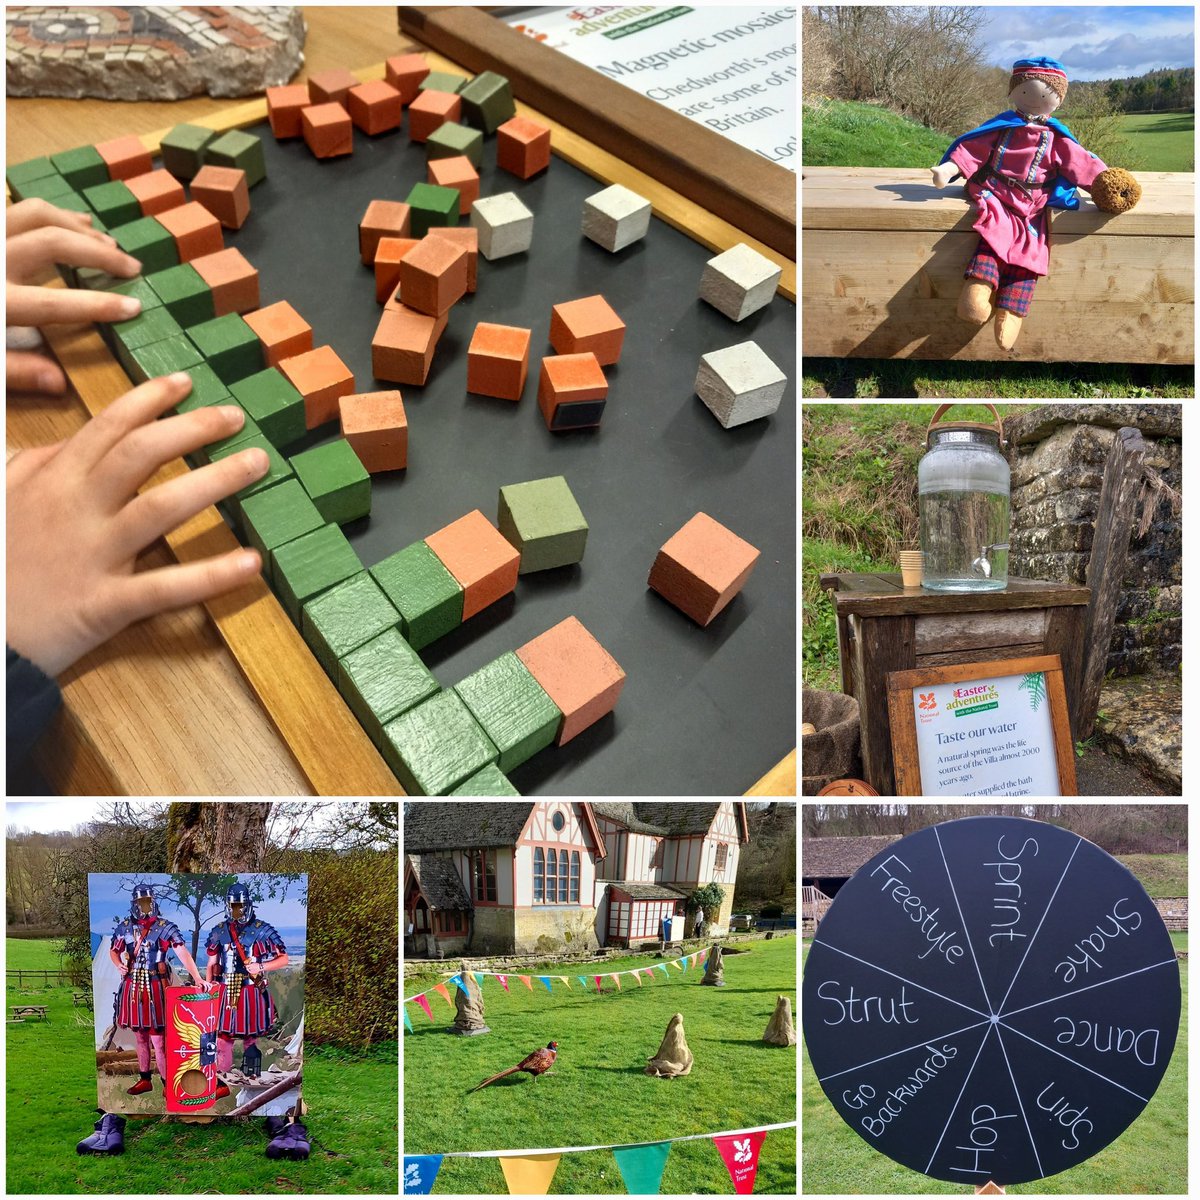 The Easter Weekend has arrived. Hop on the trail where you can make mosaics, dress up, race around the chariot arena, enter the puzzle zone, 'fight' a Roman soldier, and so much more. There will also be crafts, historical characters and site guides. #FamilyFun #EasterWeekend